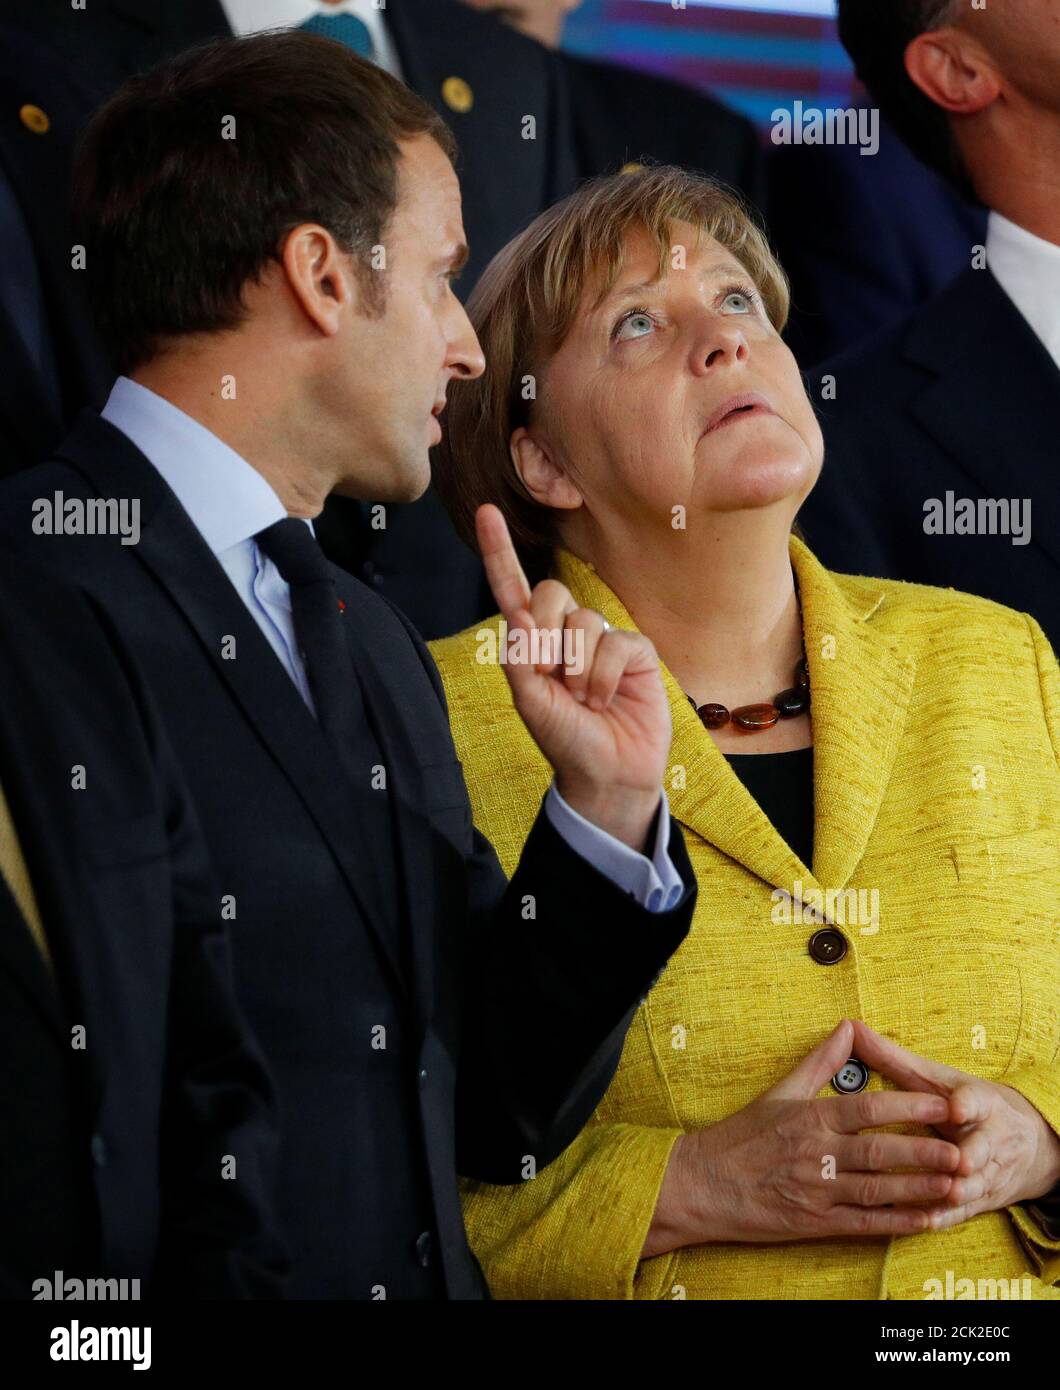 German Chancellor Angela Merkel talks with French President Emmanuel Macron  as they look at a drone during a leaders photograph at the European Union  leaders summit in Brussels, Belgium December 14, 2017.